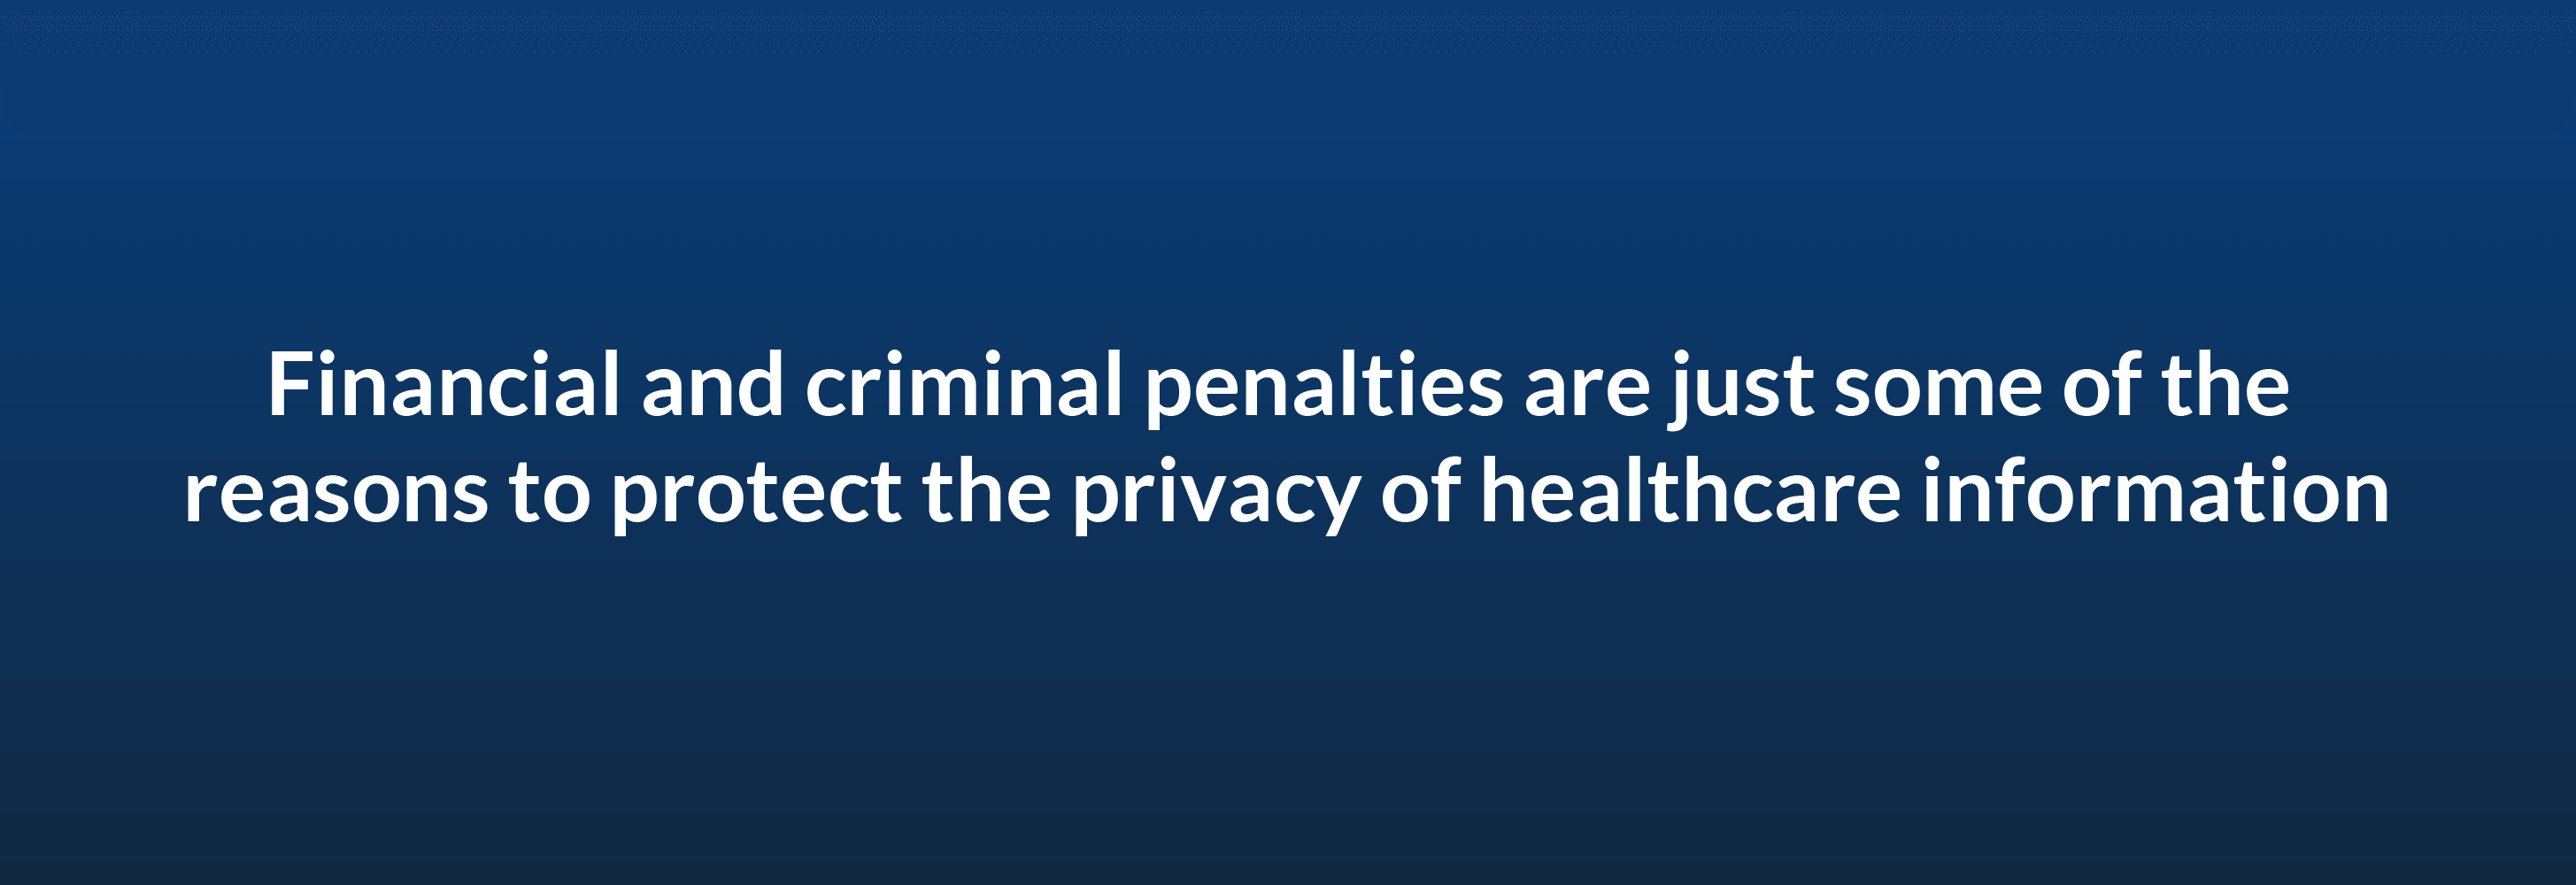 Financial and criminal penalties are just some of the reasons to protect the privacy of healthcare information